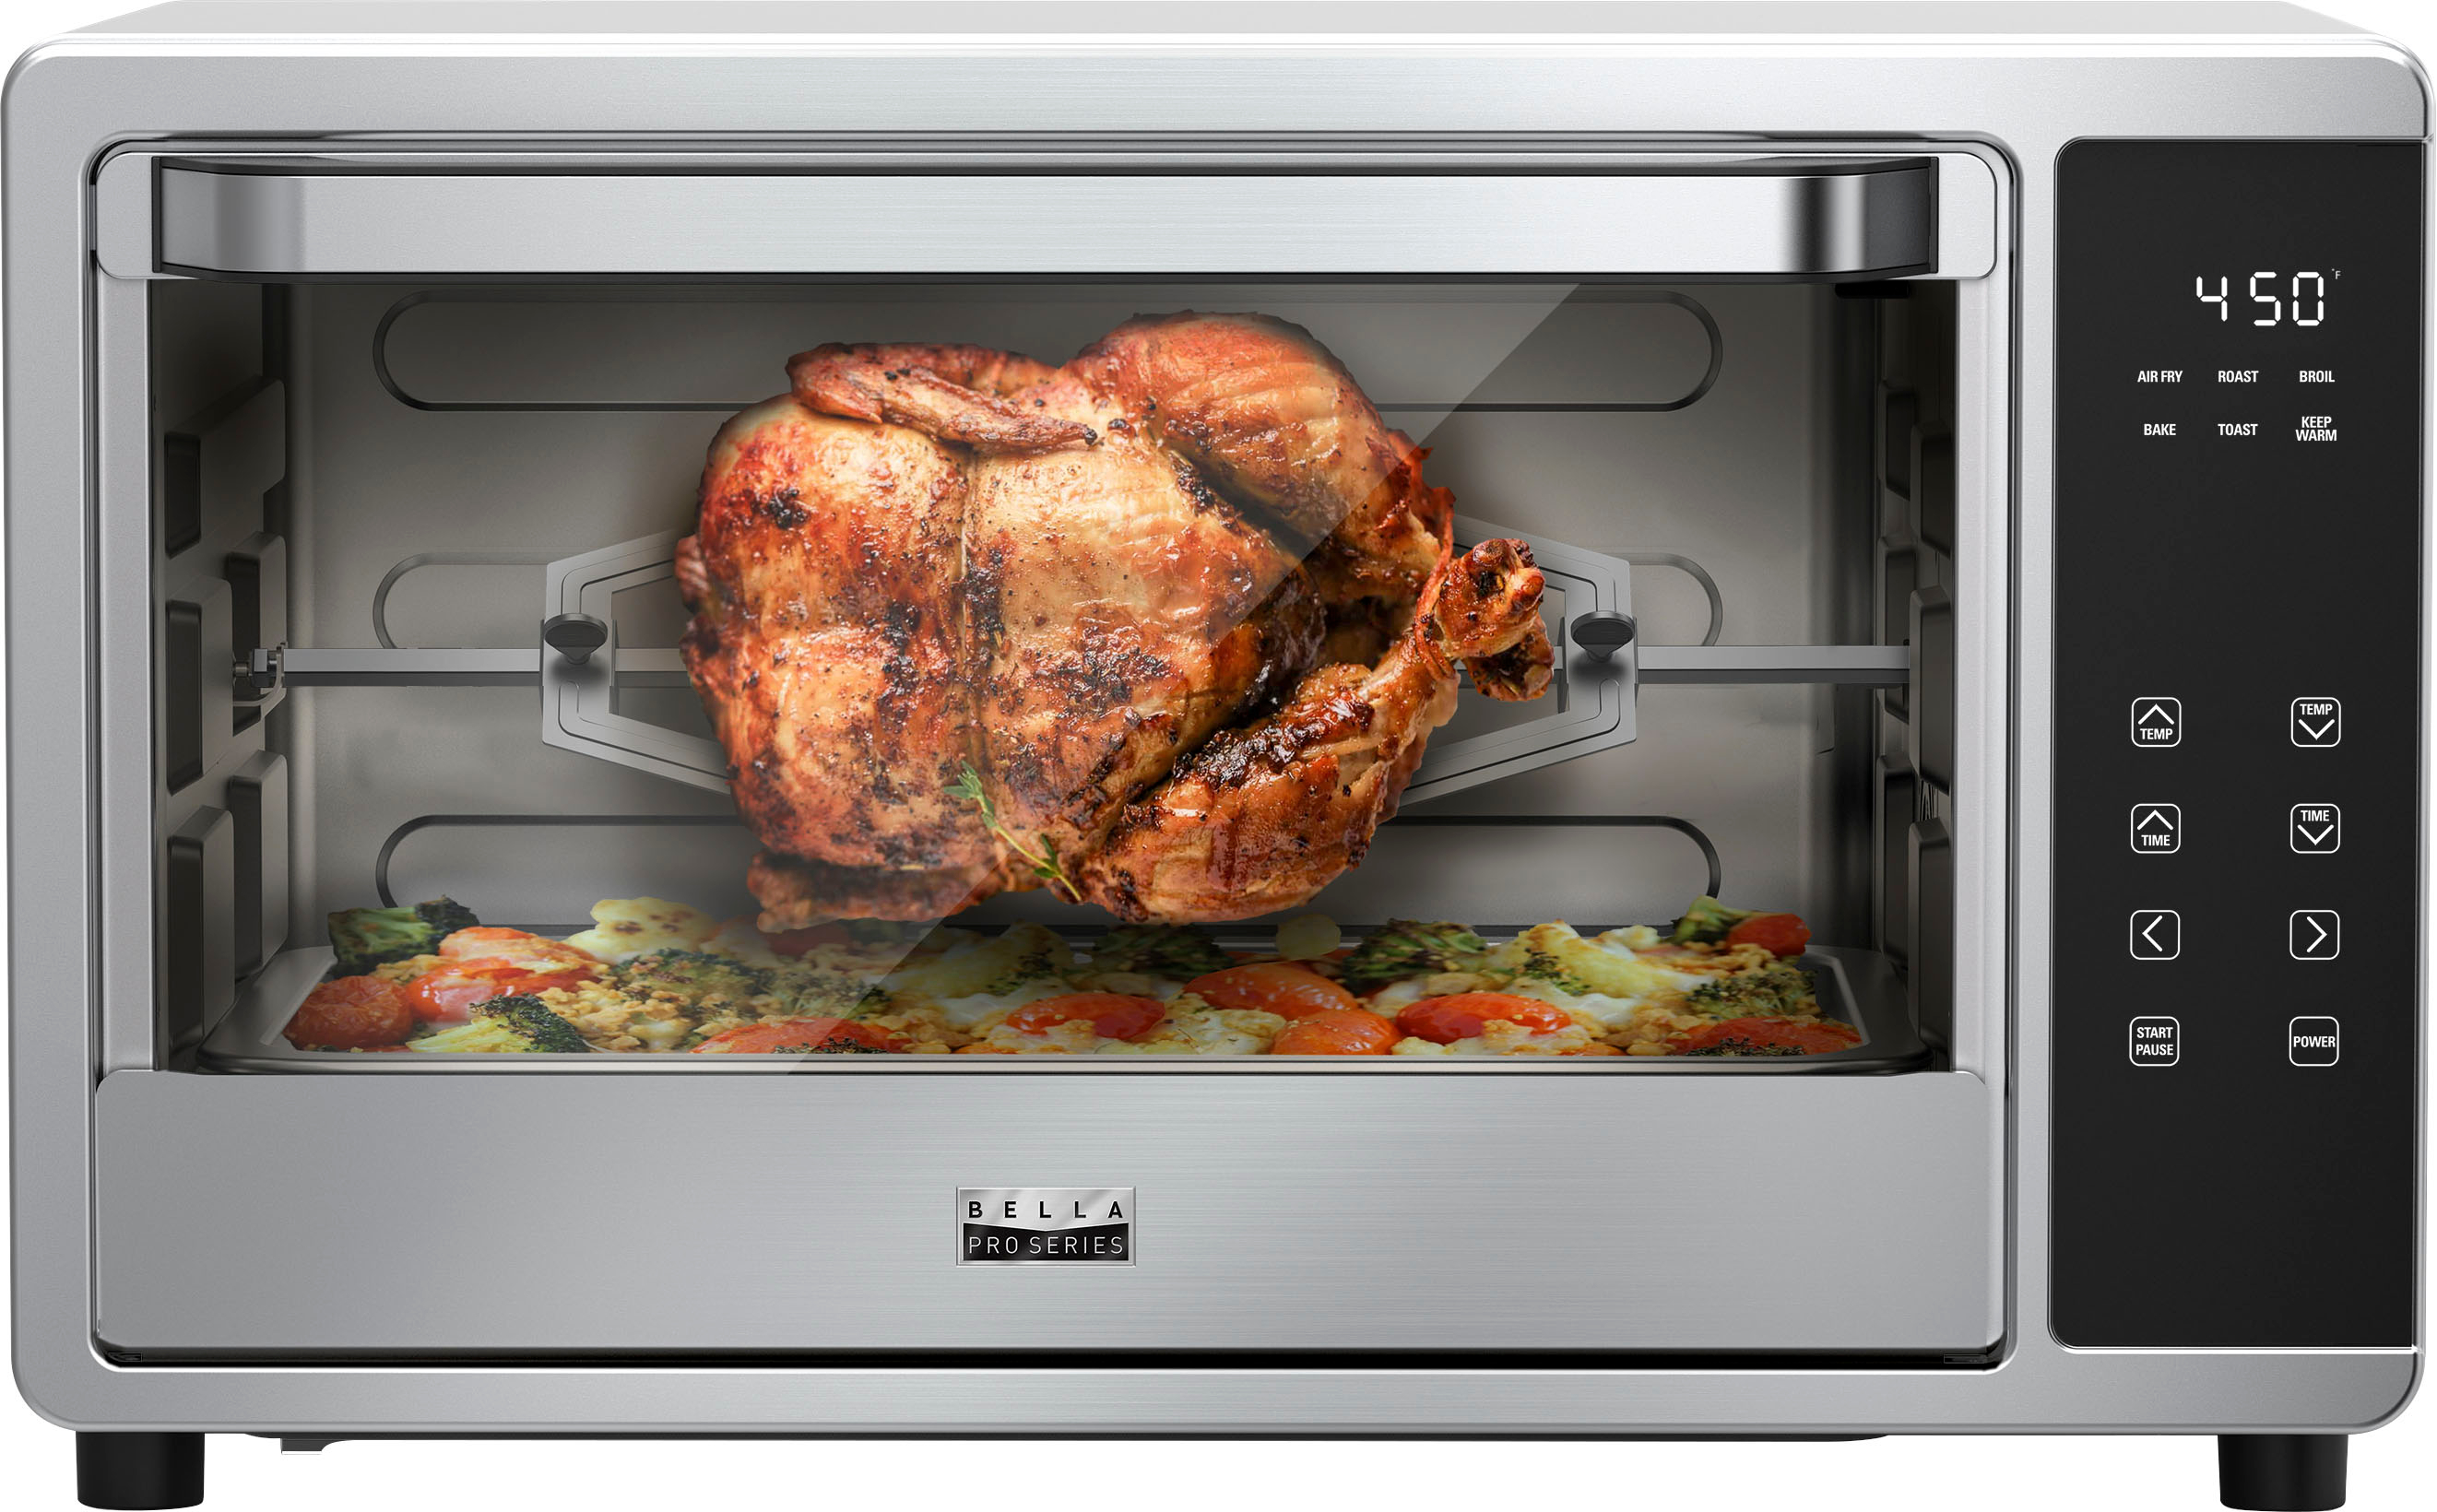 Bella Pro Series - 6-Slice Air Fryer Toaster Oven with Rotisserie - Stainless Steel $60